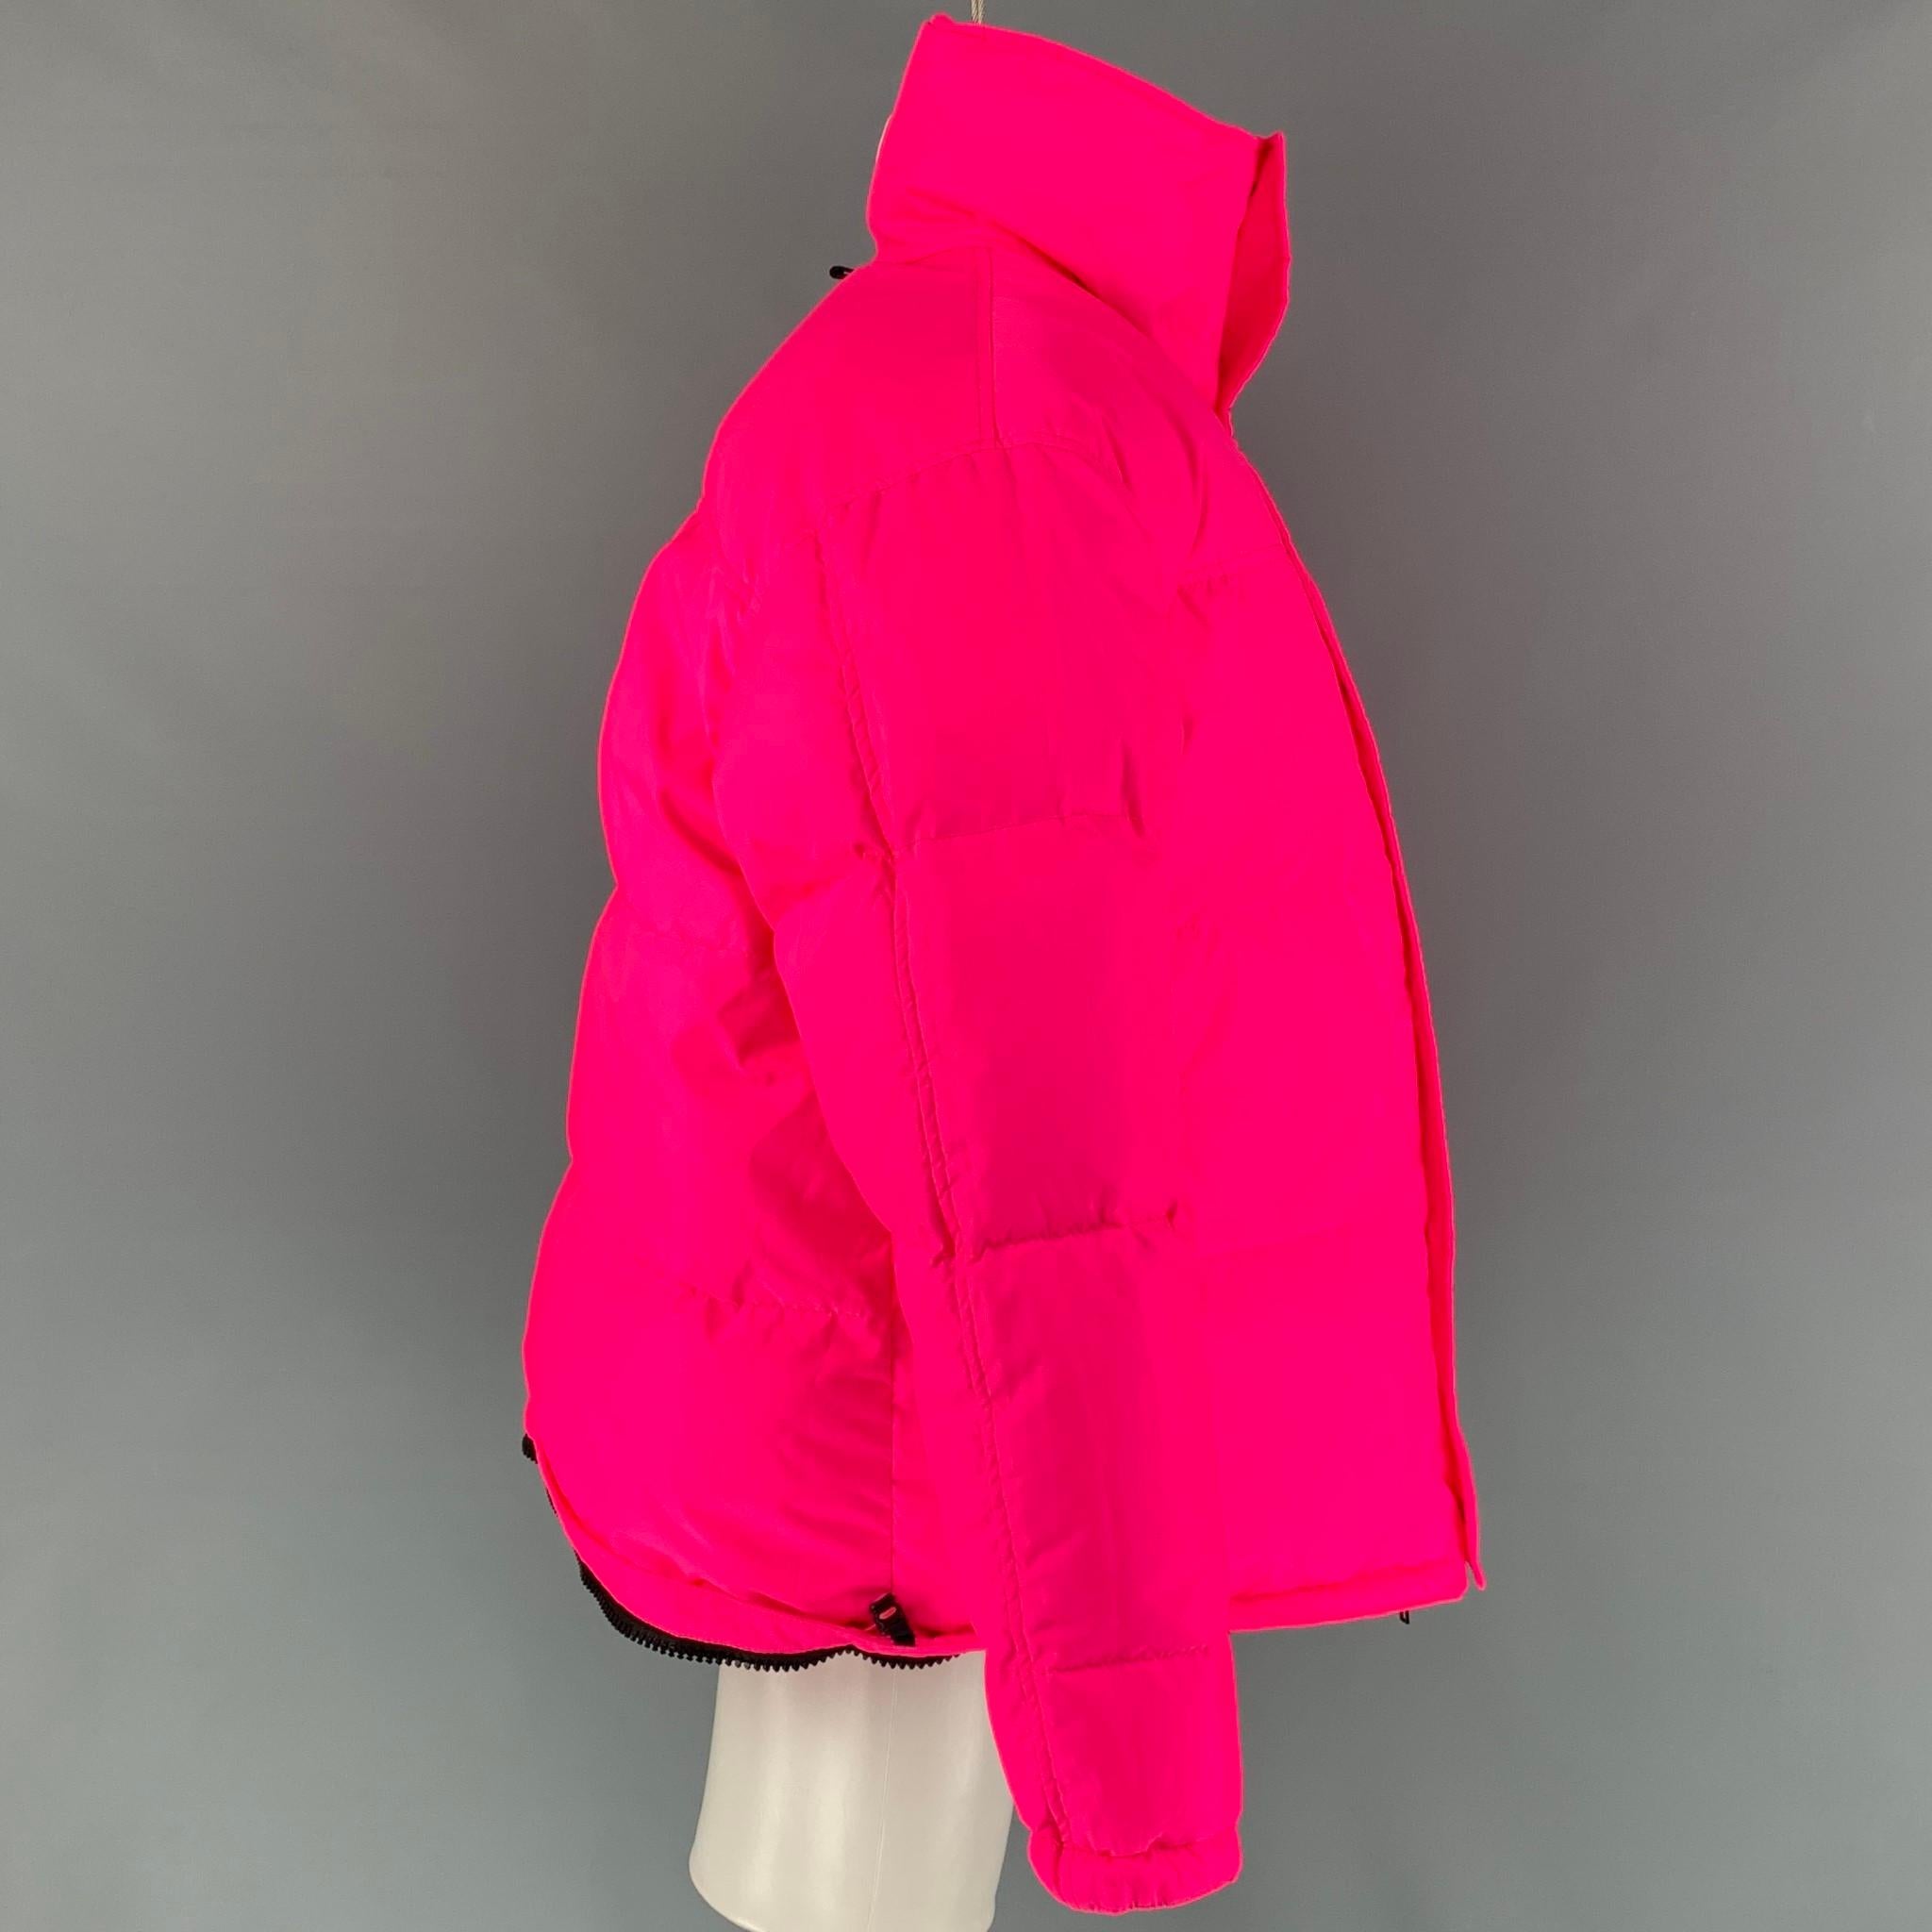 VETEMENTS FW 19 jacket comes in a fluo pink quilted polyester featuring a oversized fit, hidden hood detail, drawstring hem, high collar, slit pockets, and a snap button closure. Jacket could styled as a cropped jacket using the hidden zip fasteners